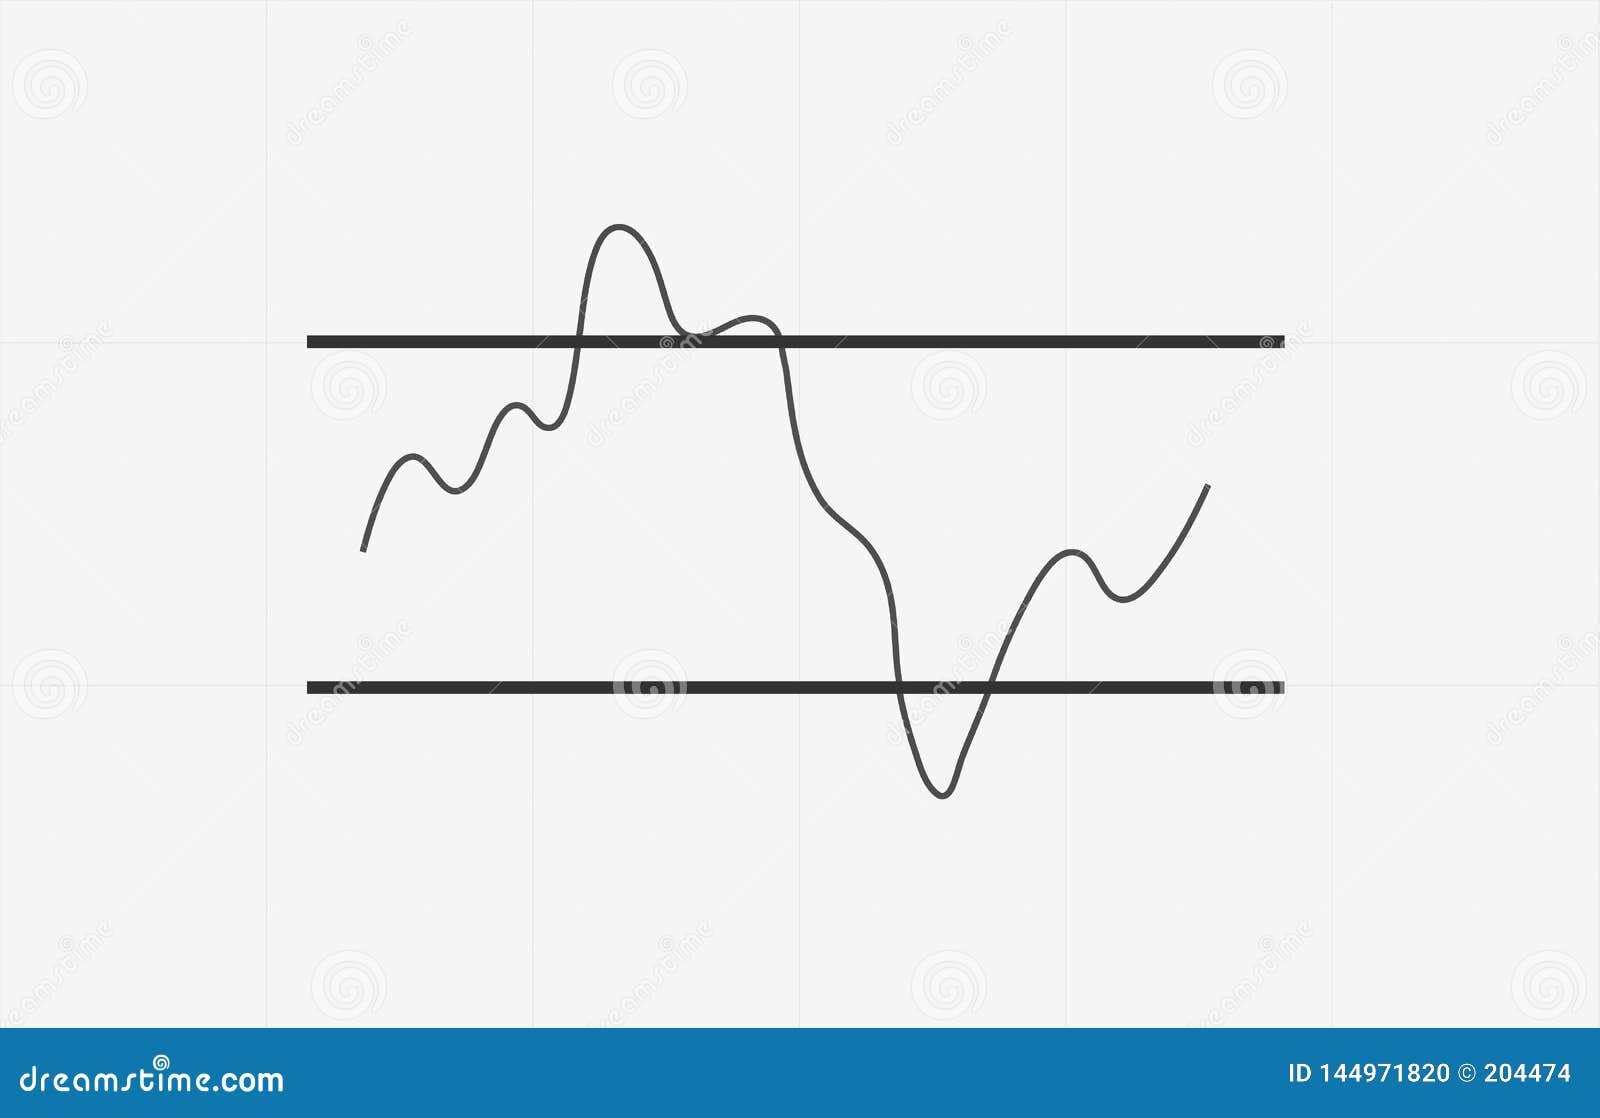 Technical Analysis Charts For Cryptocurrency